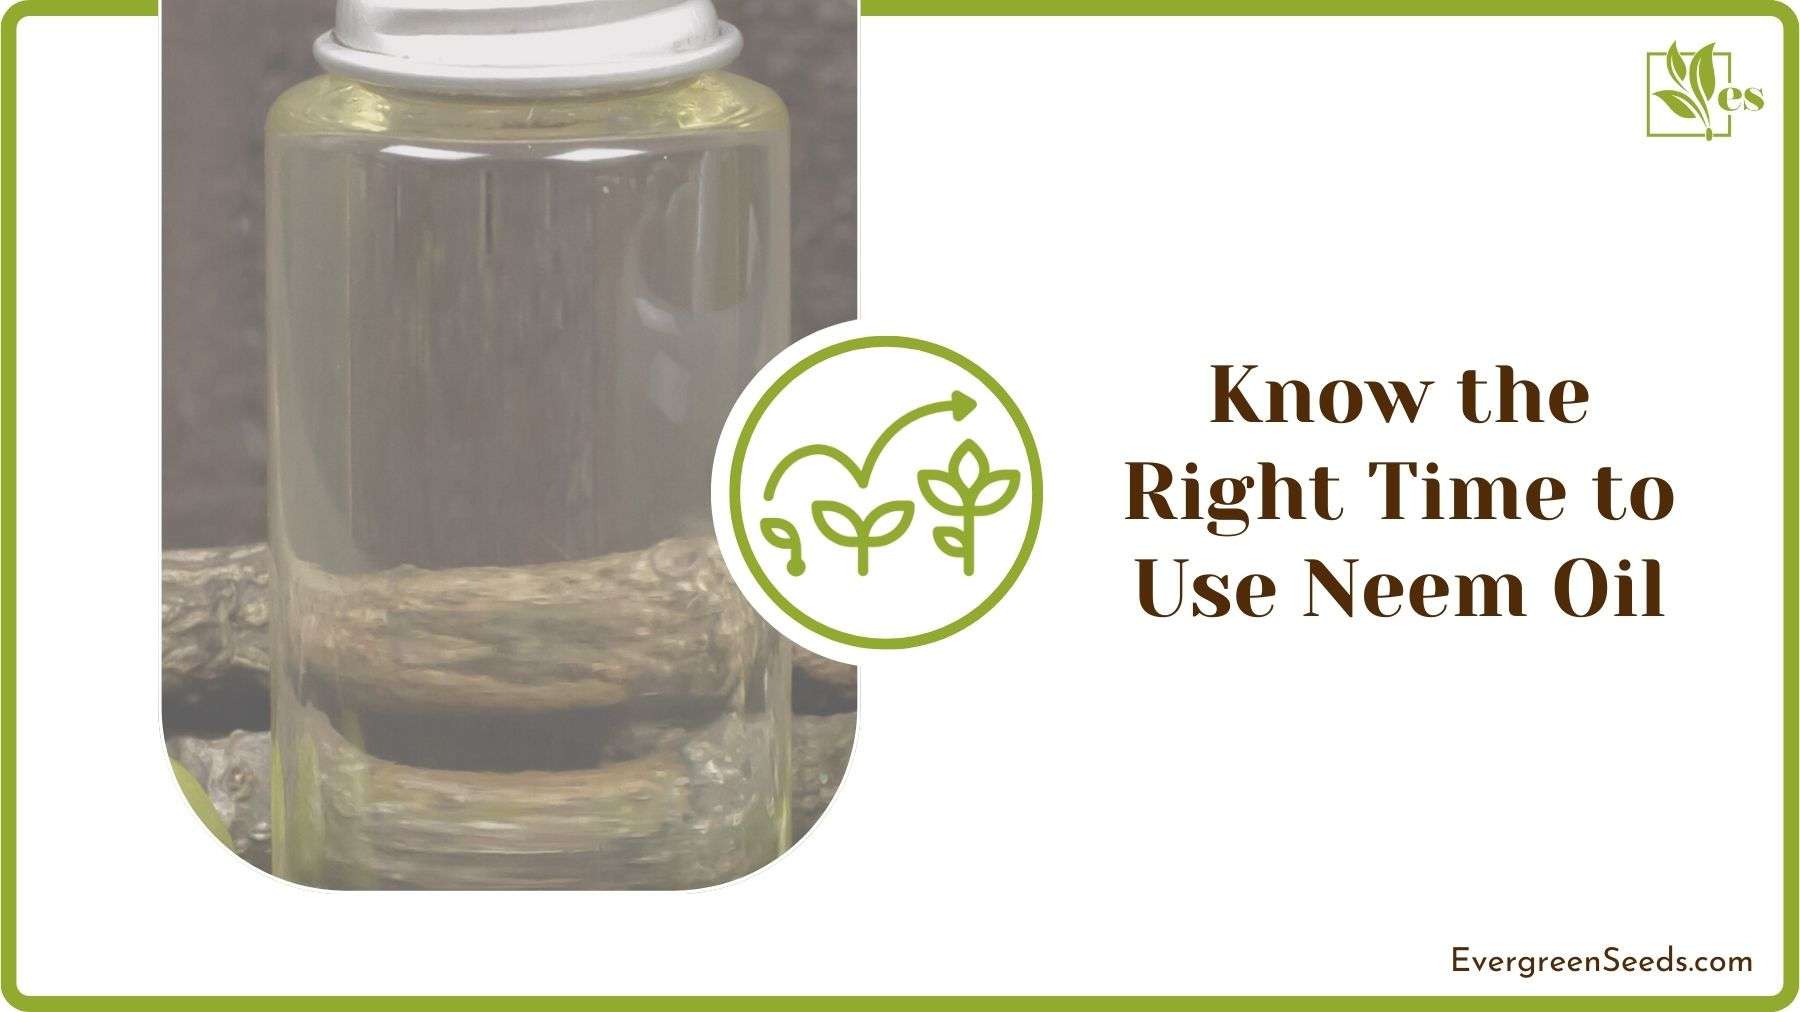 Right Time to Use Neem Oil